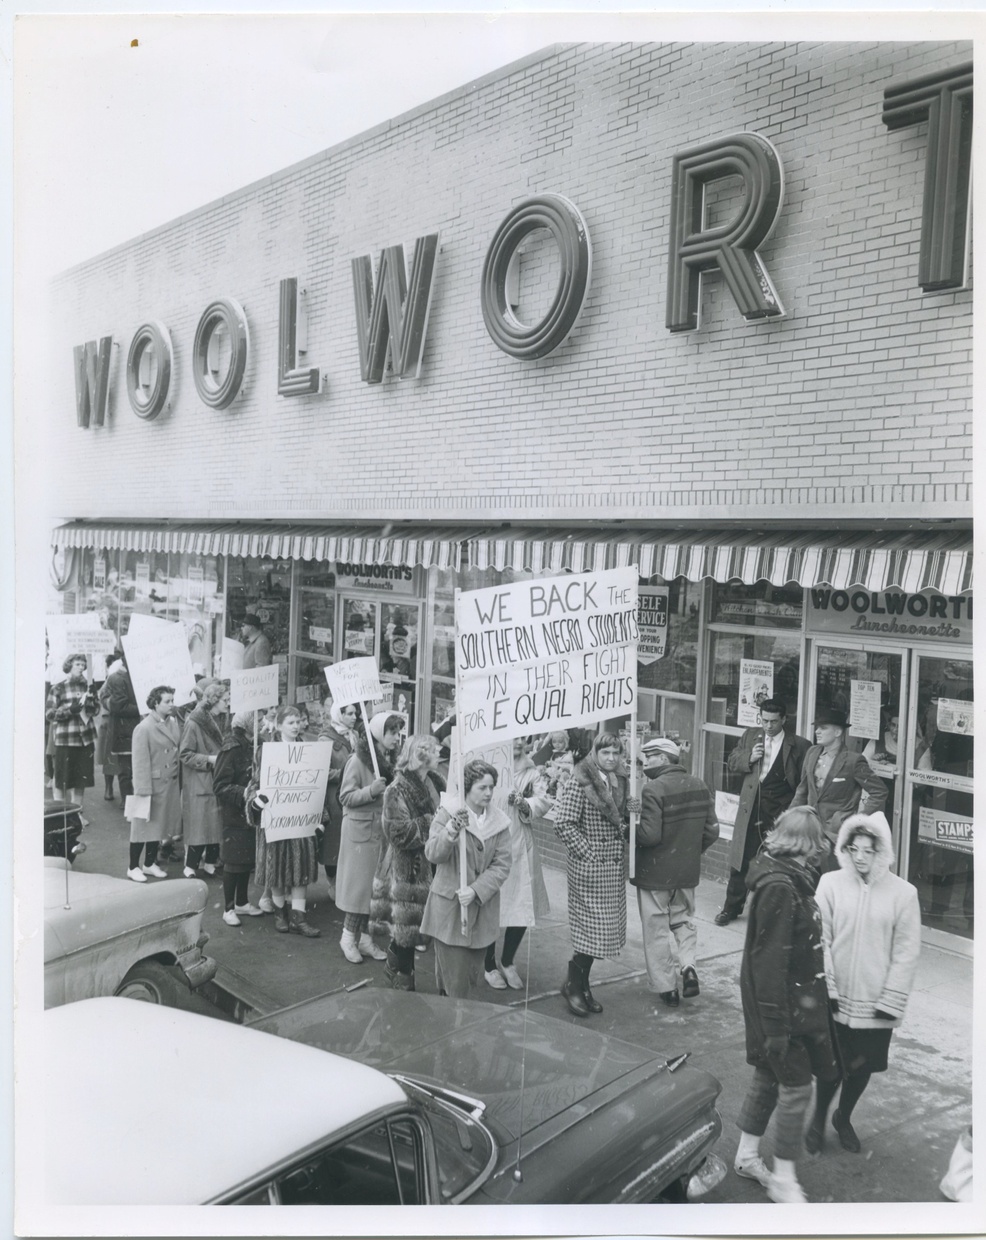 A black and white image depicts a line of light-skinned young women protesting in front of a Woolworth store. The protesters are wearing coats and holding signs and there are cars parked in front of the store.